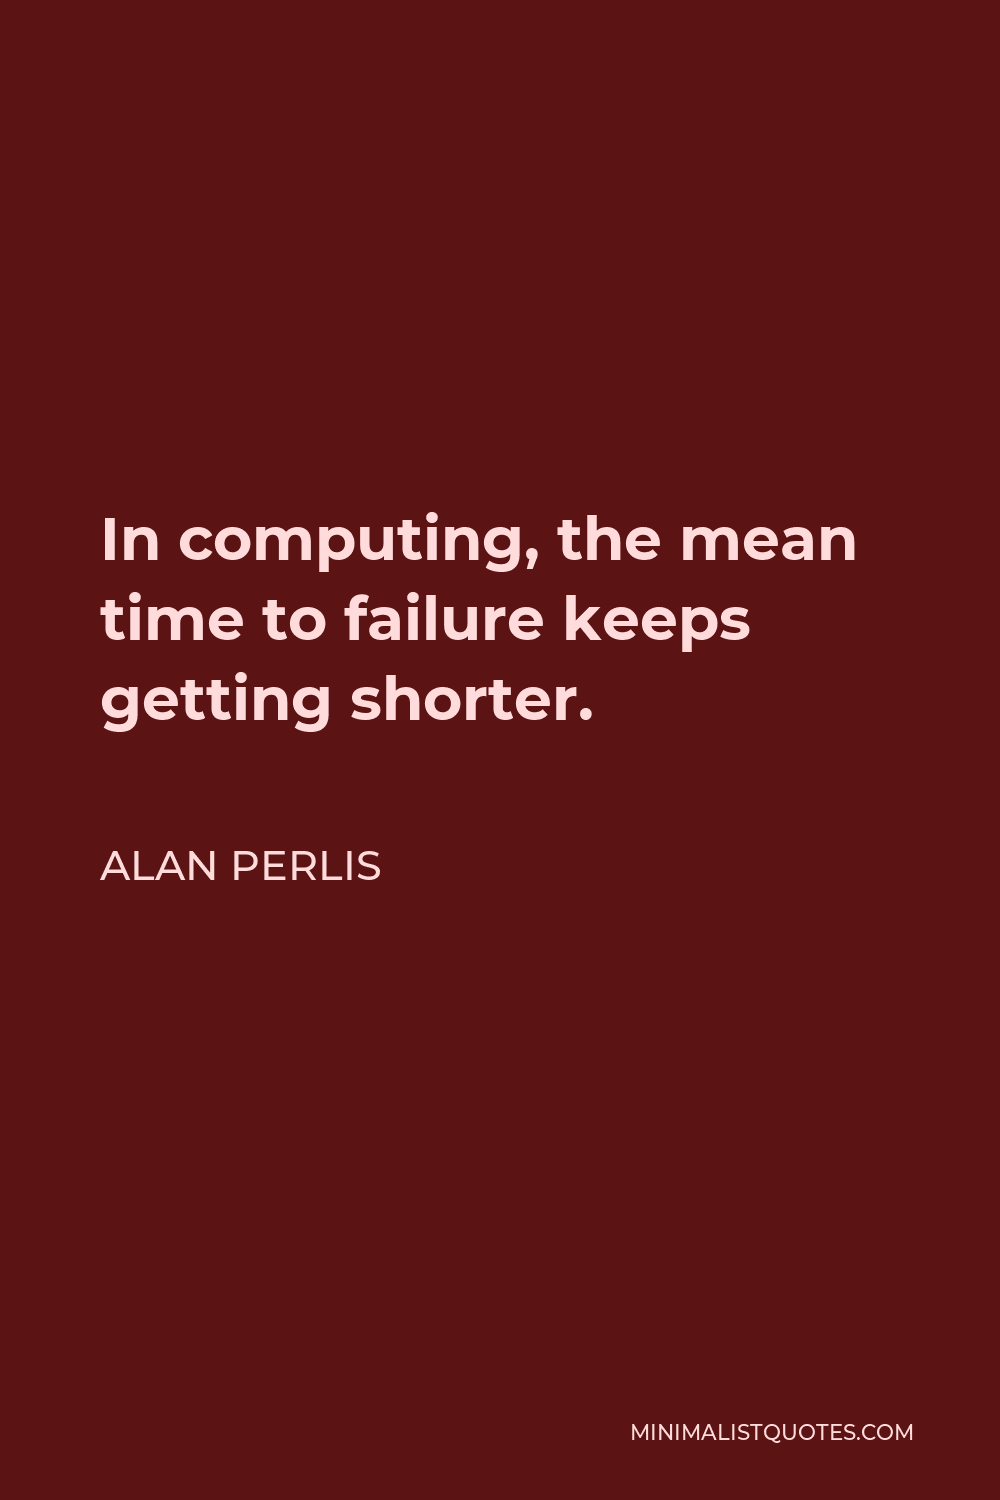 Alan Perlis Quote - In computing, the mean time to failure keeps getting shorter.